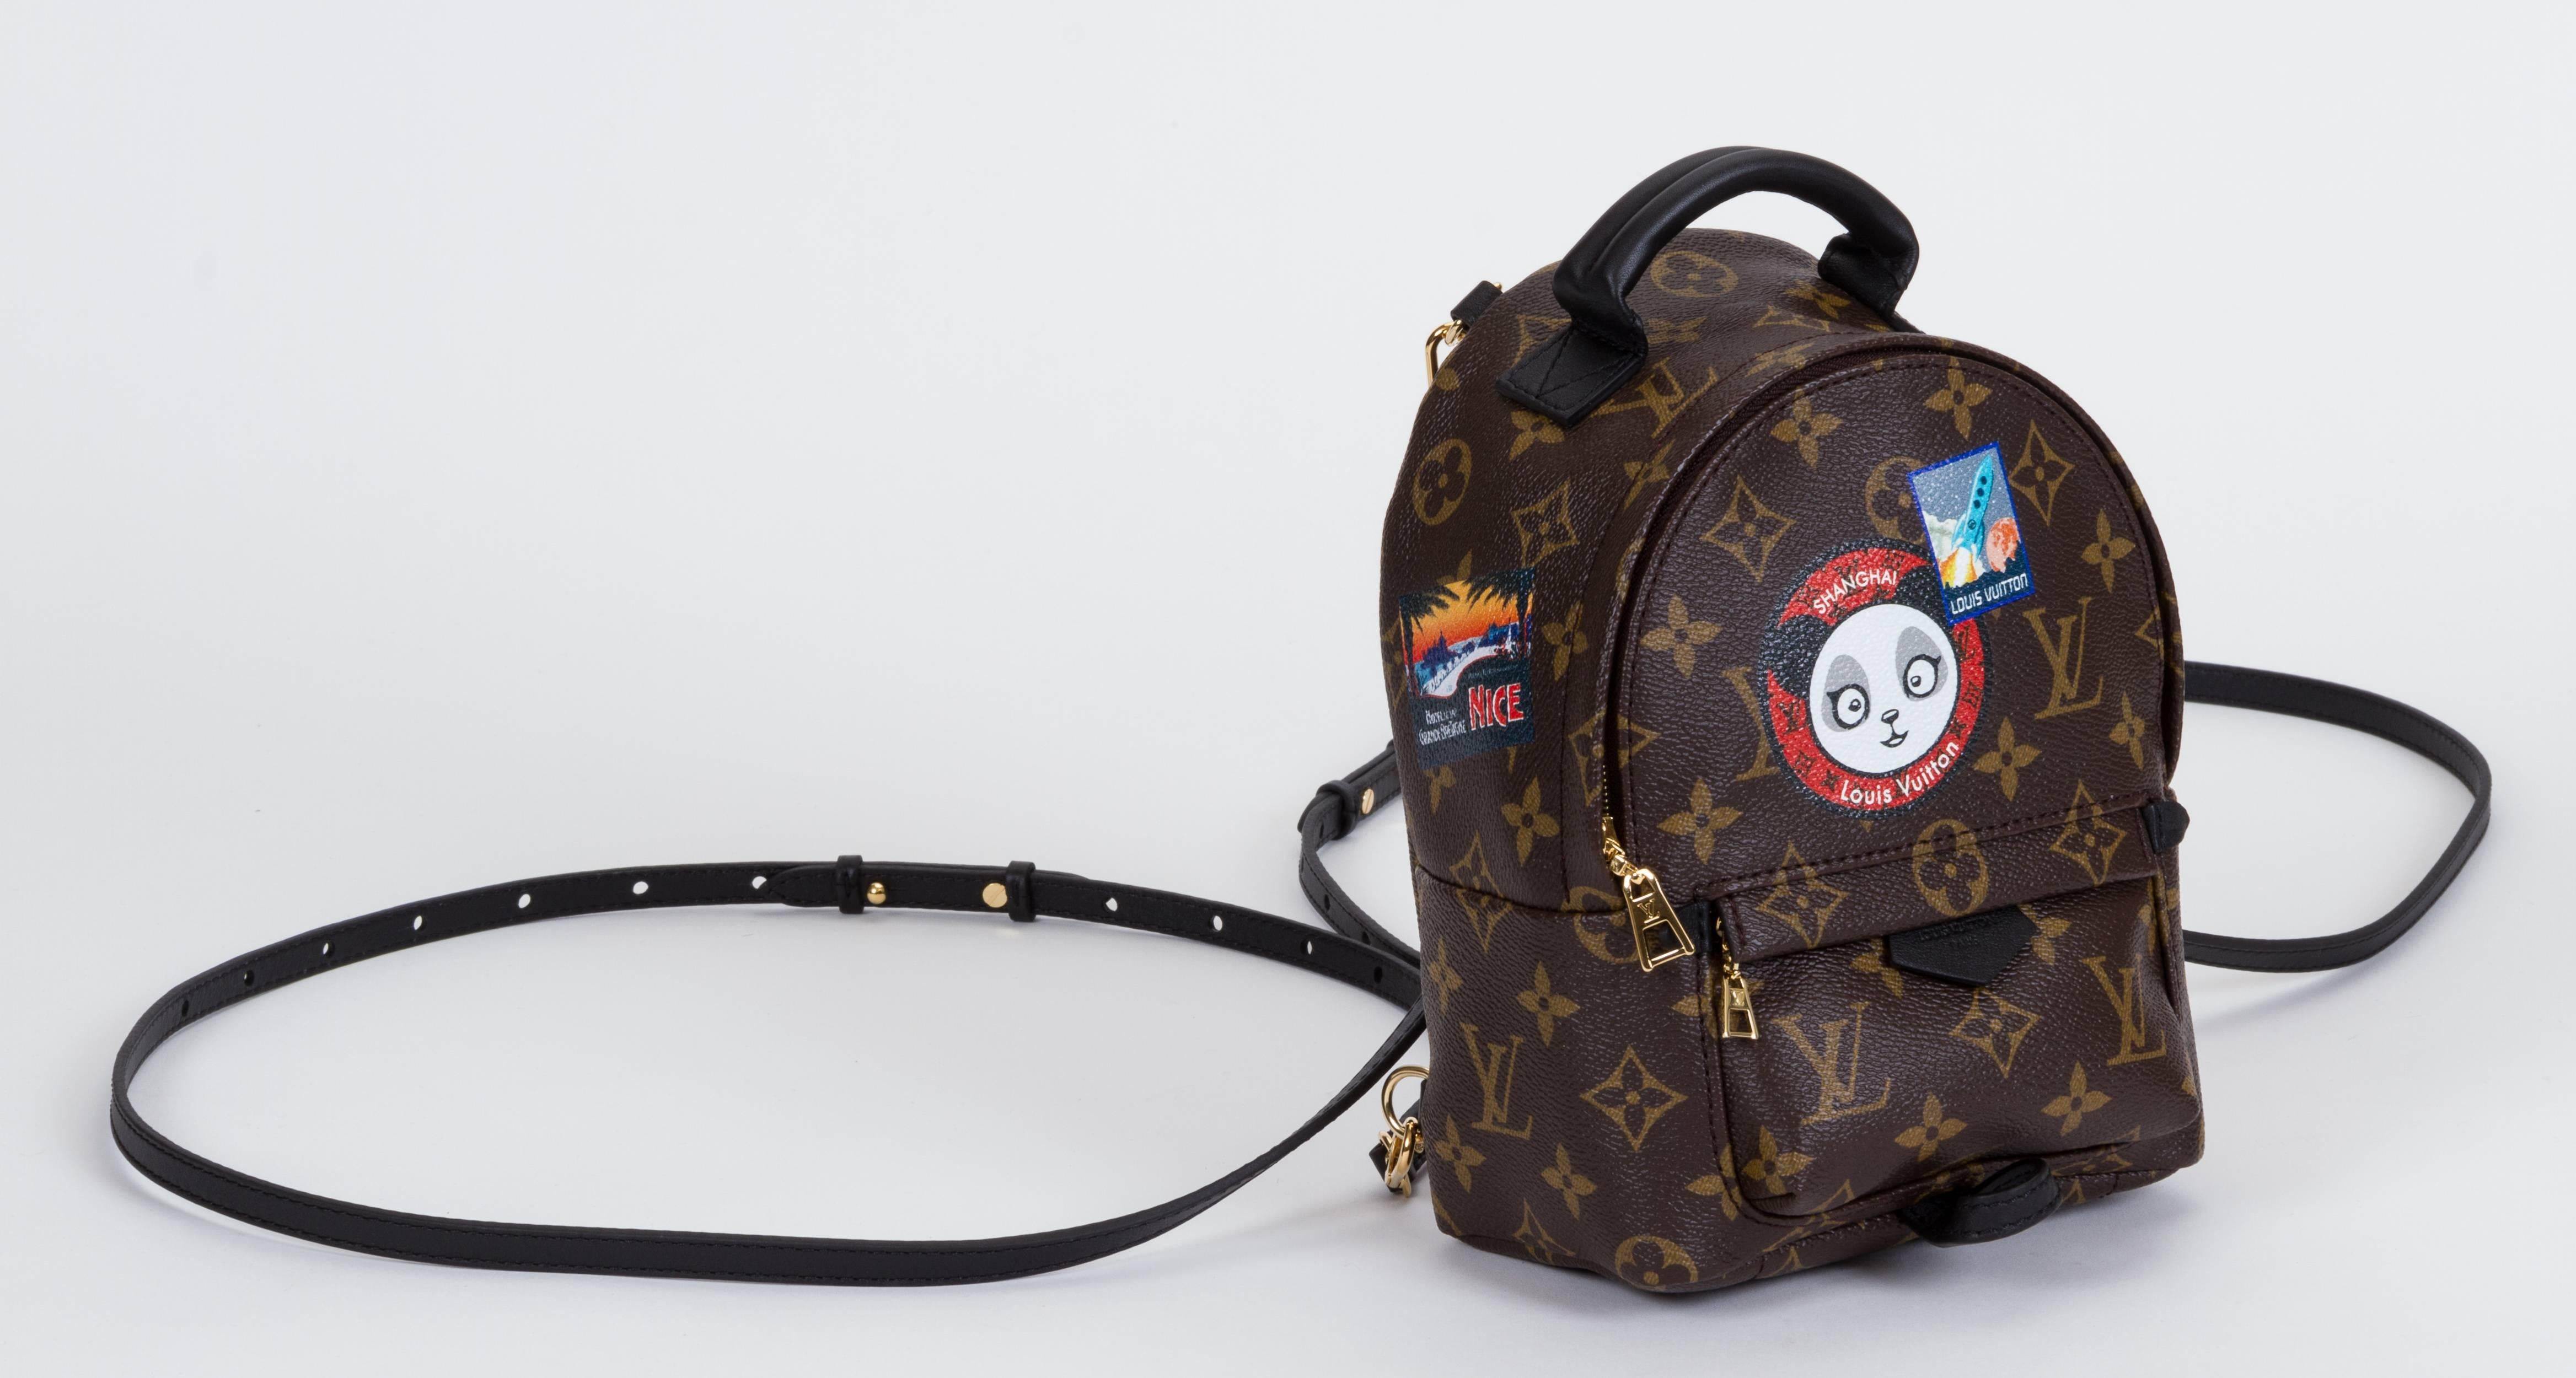 Louis Vuitton SOLD OUT mini monogram backpack. Limited edition with stencils design. Nicolas Ghesquière new take on a very classic staple of the Vuitton collection. The mini monogram canvas sports a multi-positional strap for cross-body wear. Brand